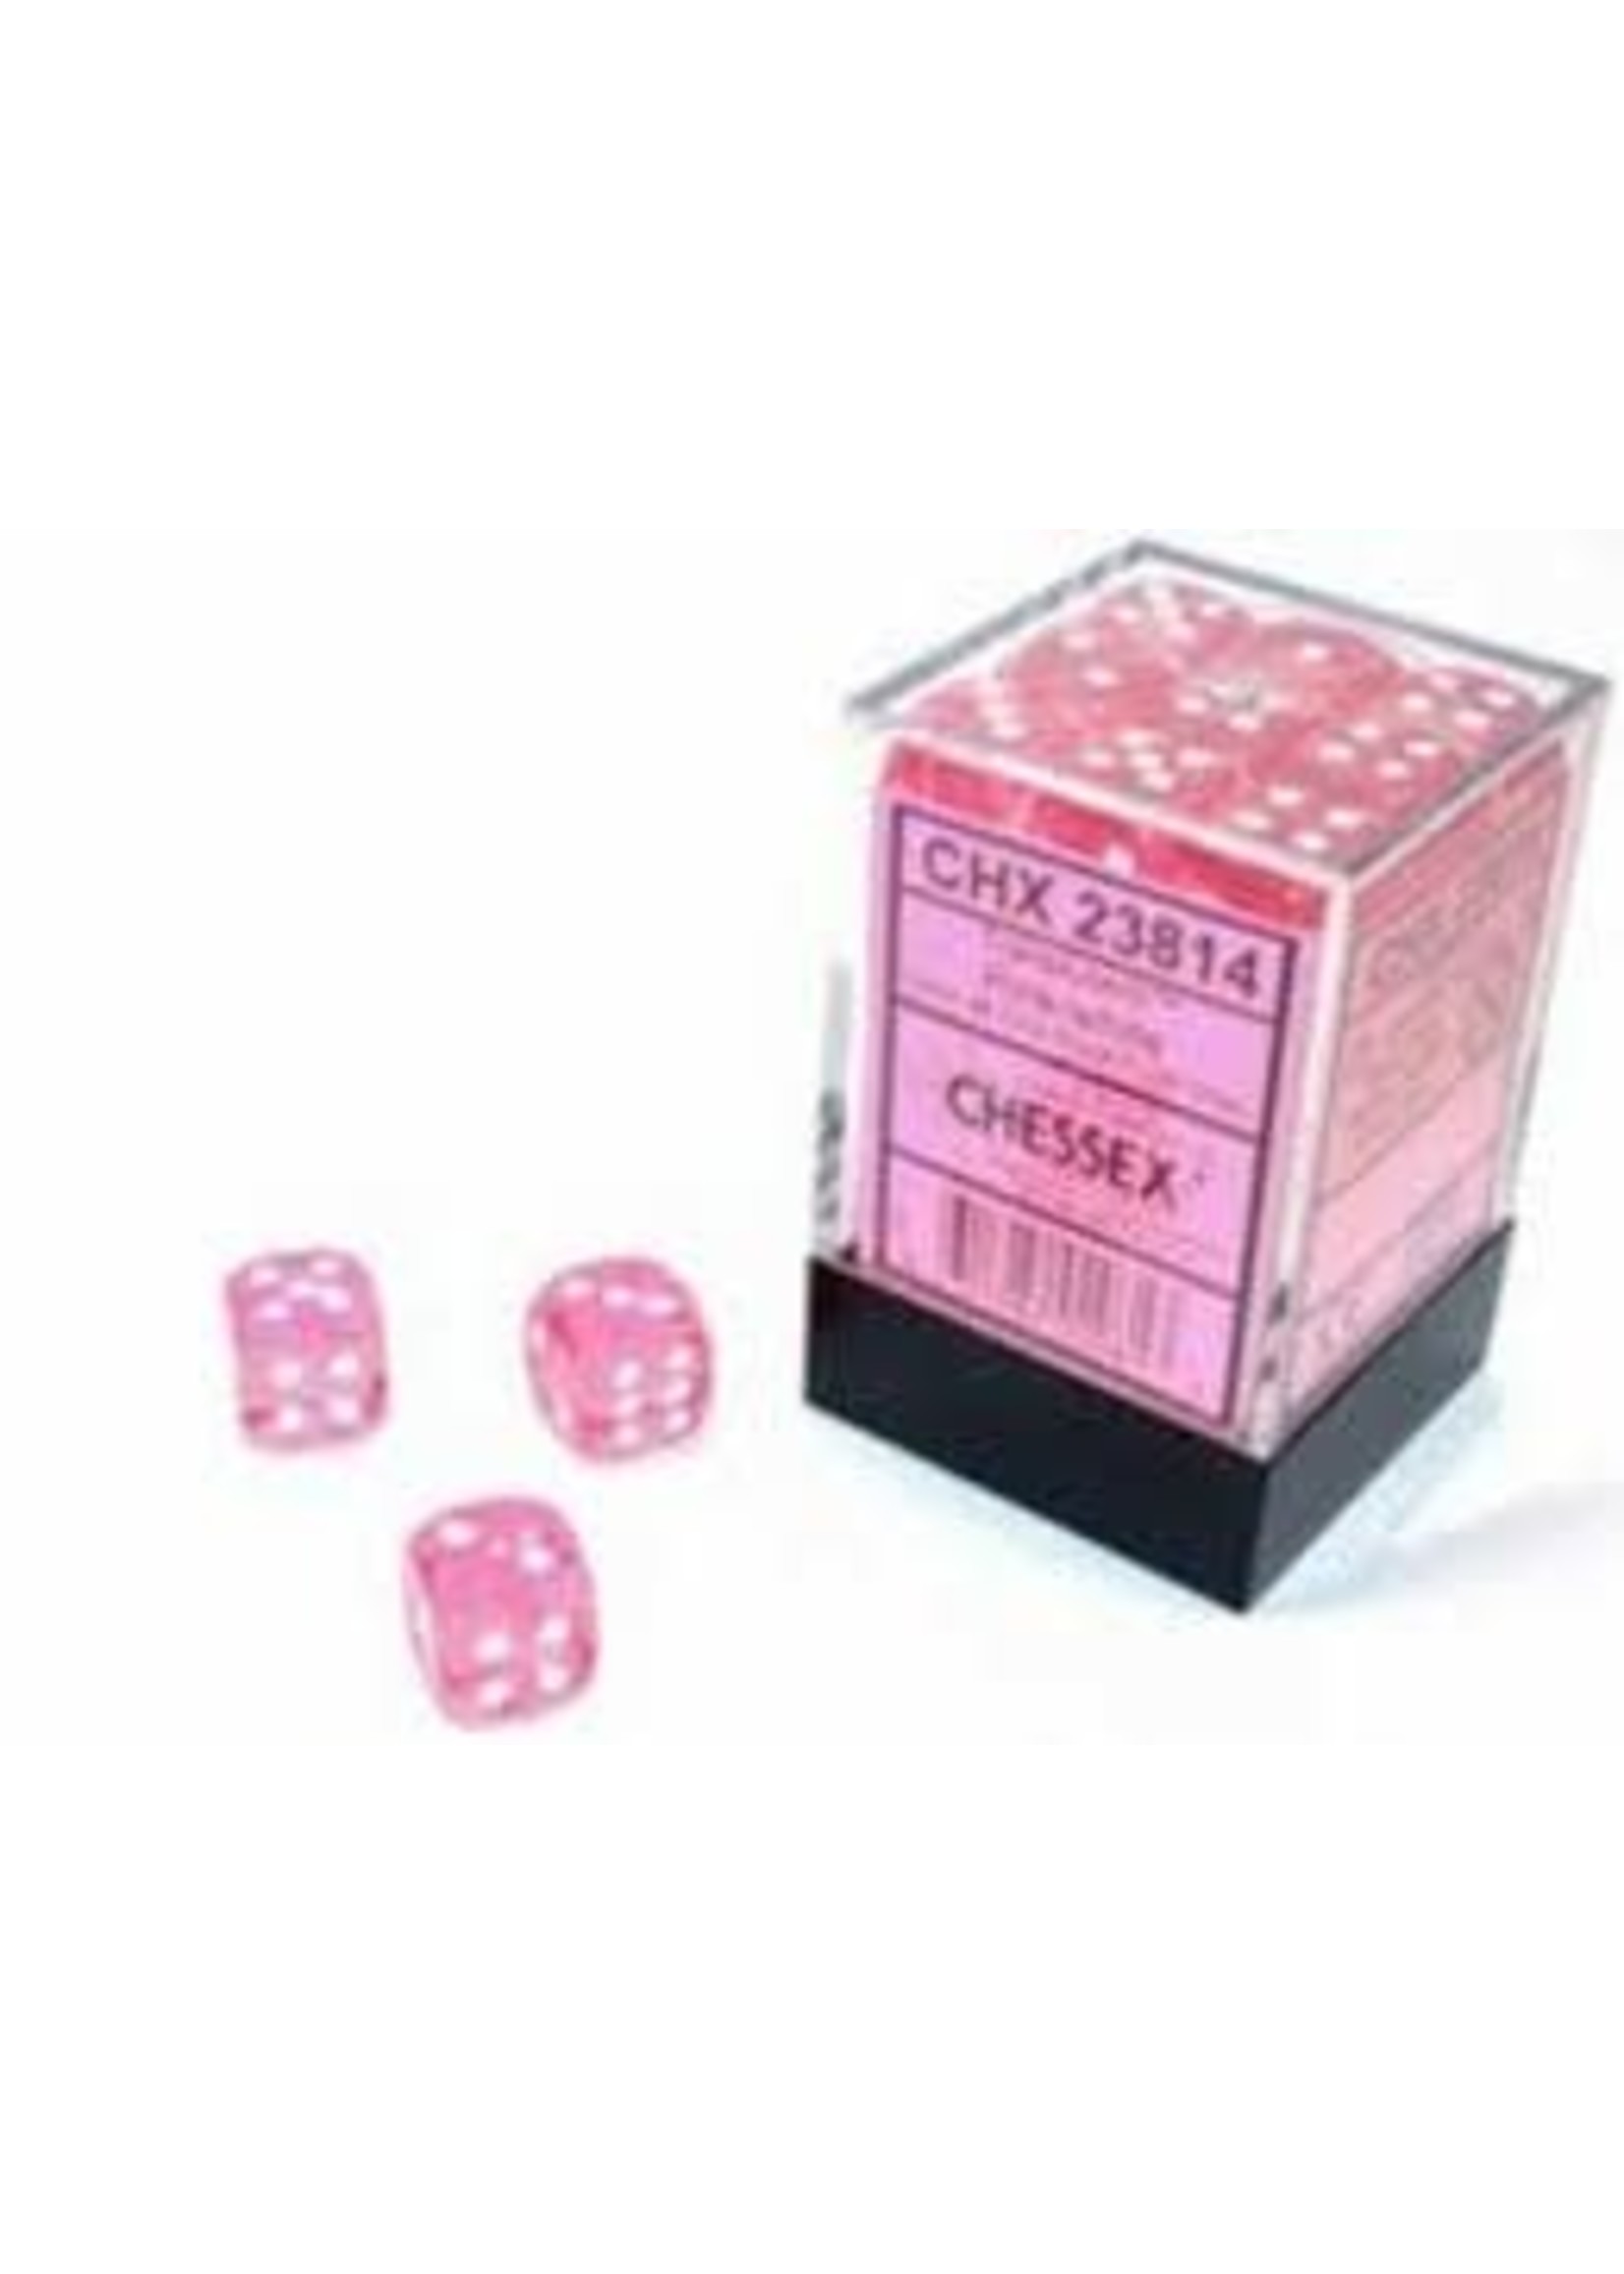 Chessex d6 Cube 12mm Translucent Pink w/ White (36)